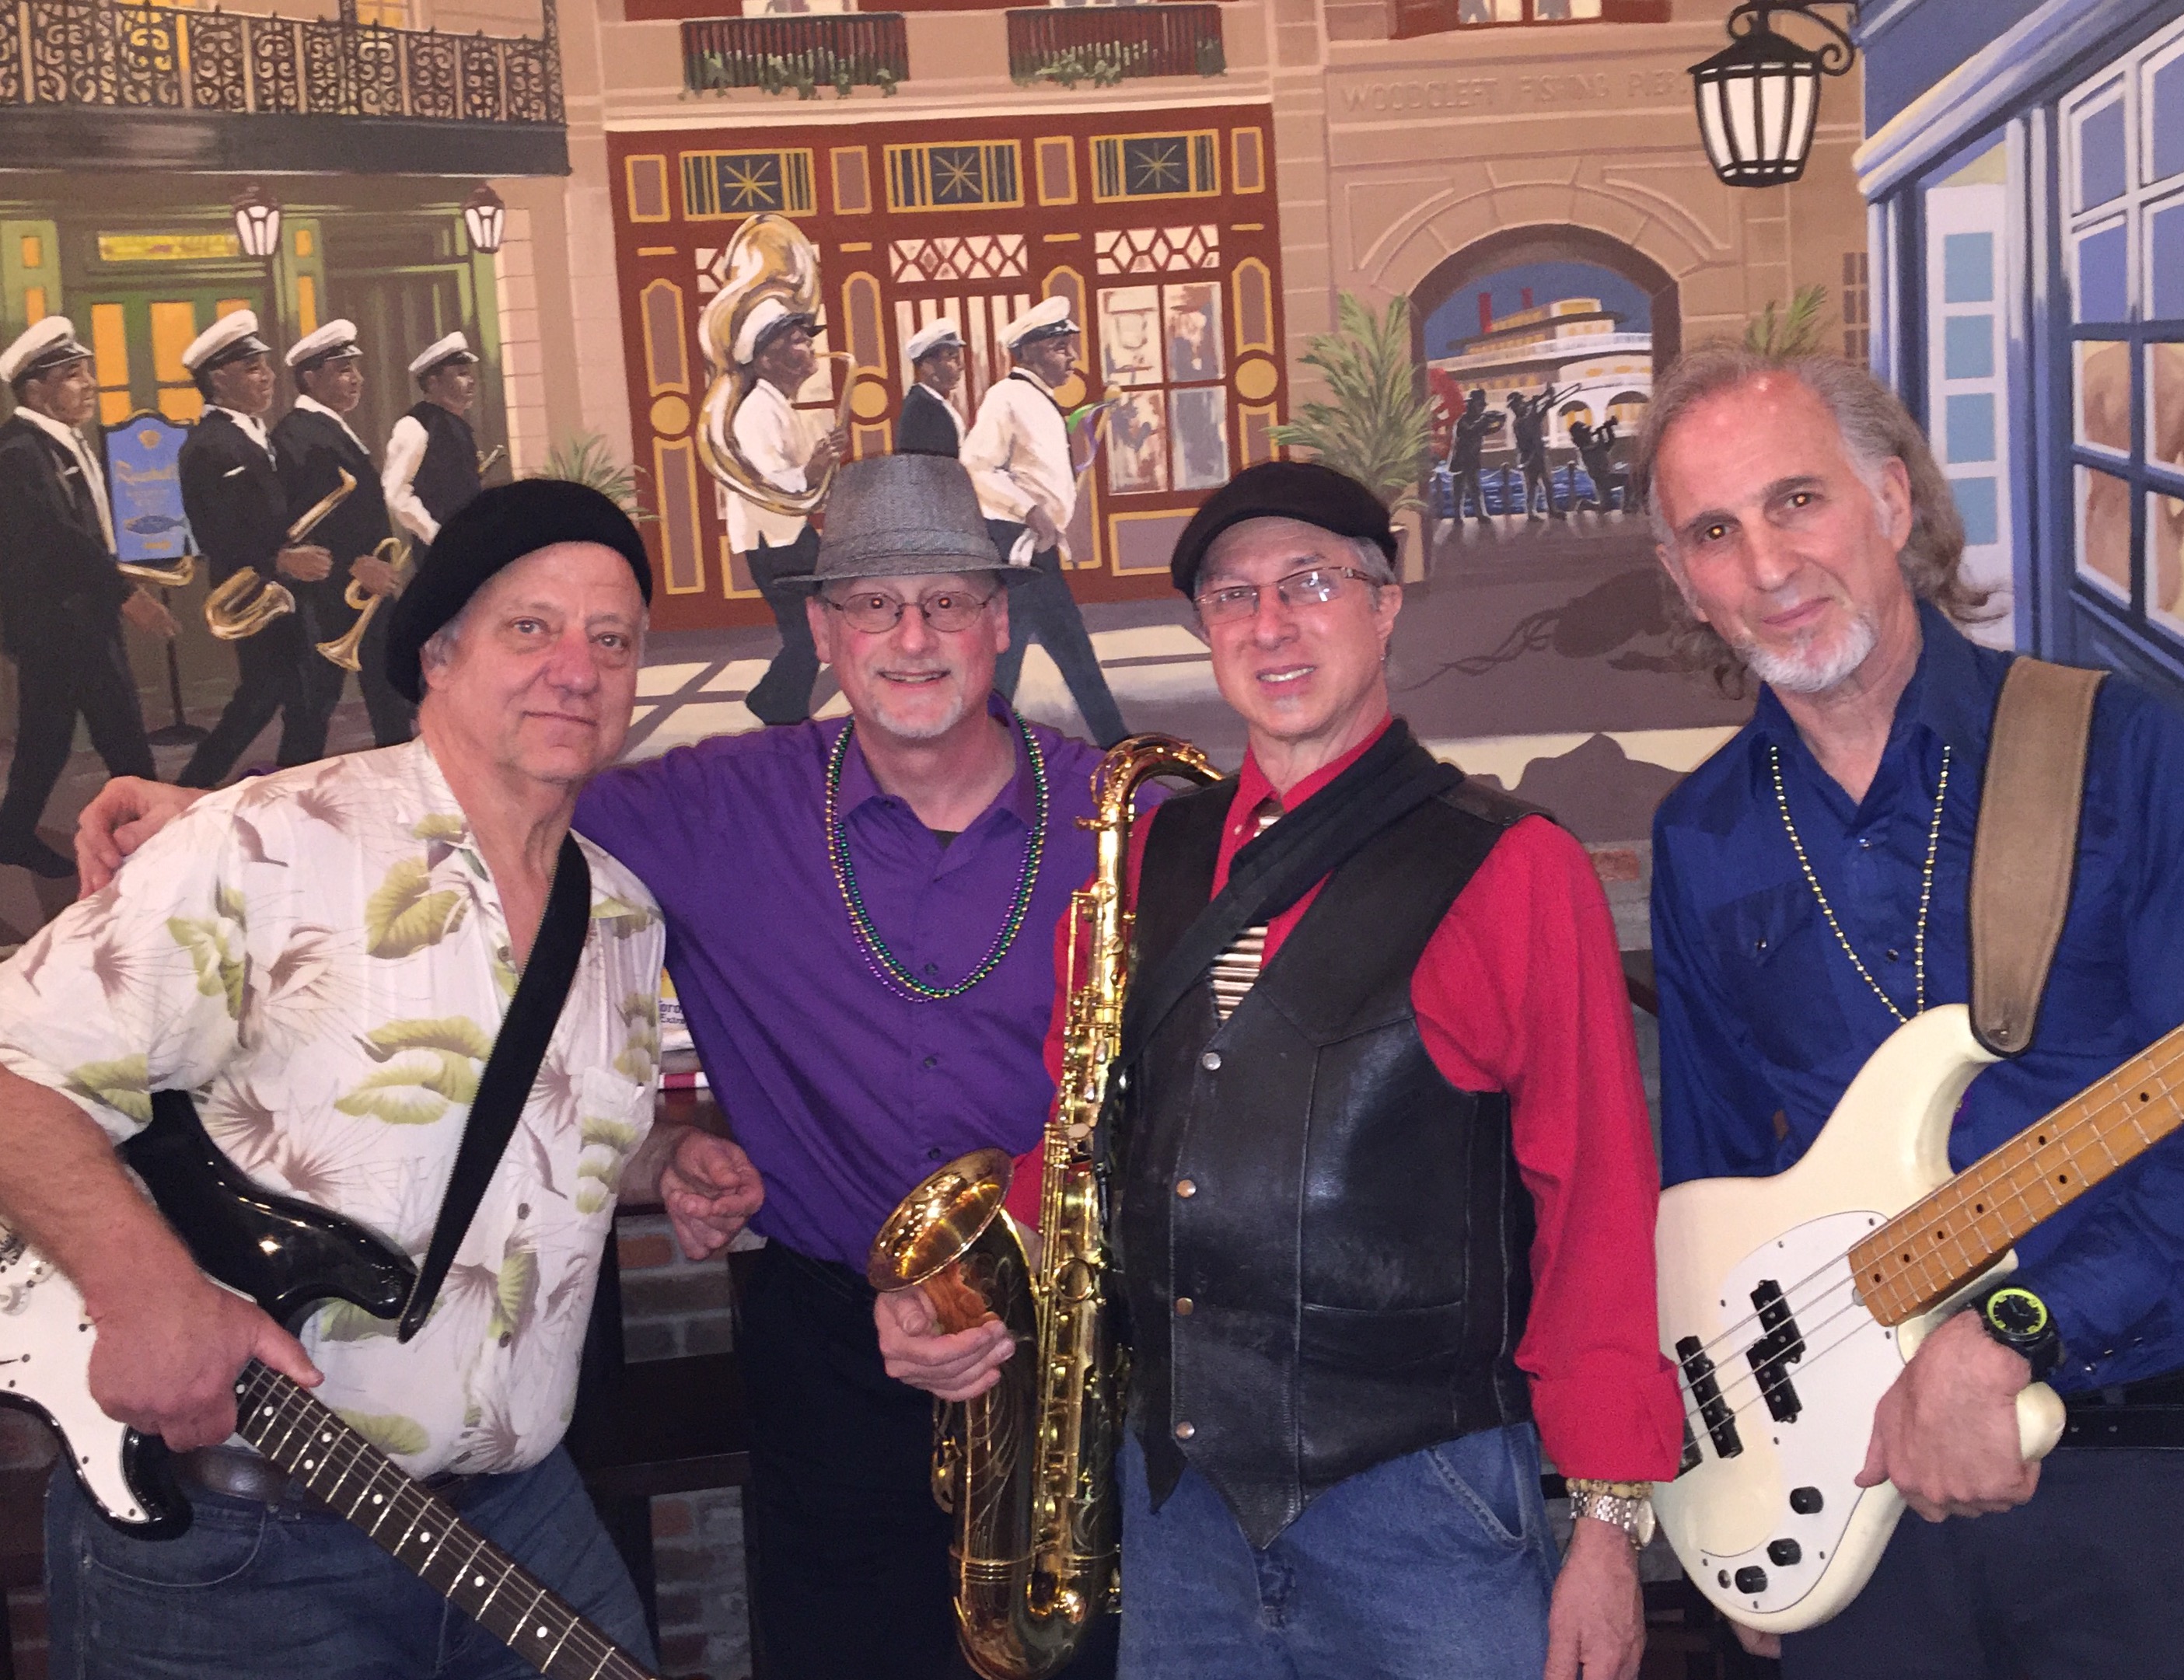 Photos of The Nawlins Funk Band